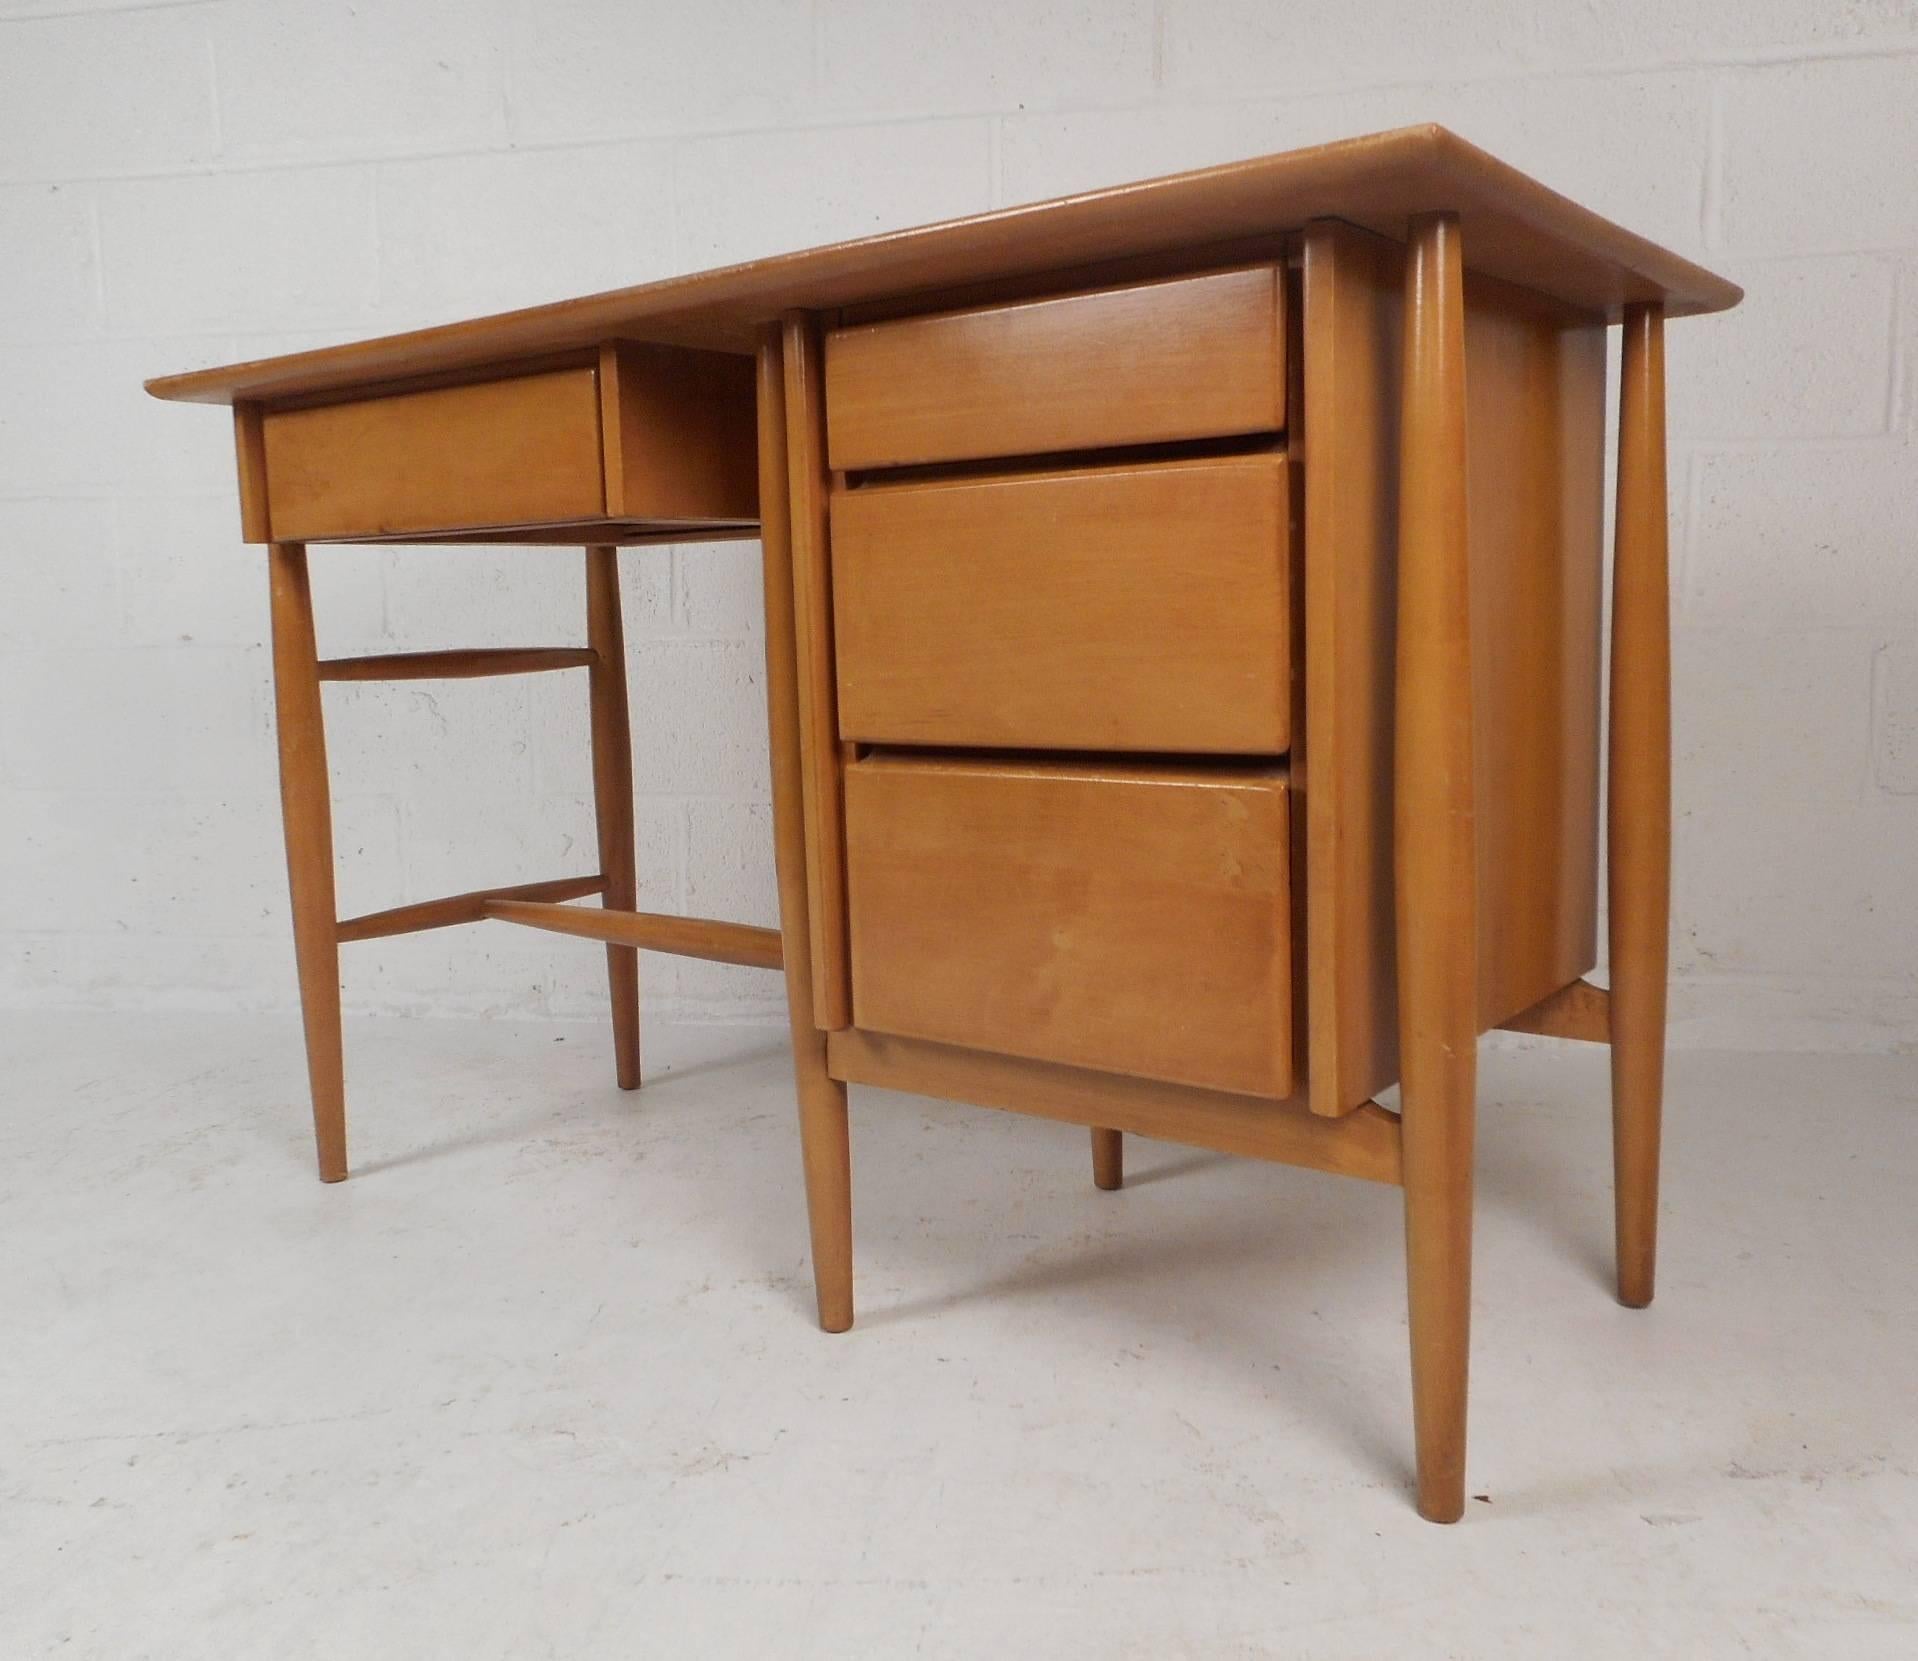 This beautiful vintage modern set includes a desk and a side chair. The desk is made of solid maple and features four large drawers. Quality craftsmanship with a finished back and a large top ensuring plenty of work space. The iconic side chair has